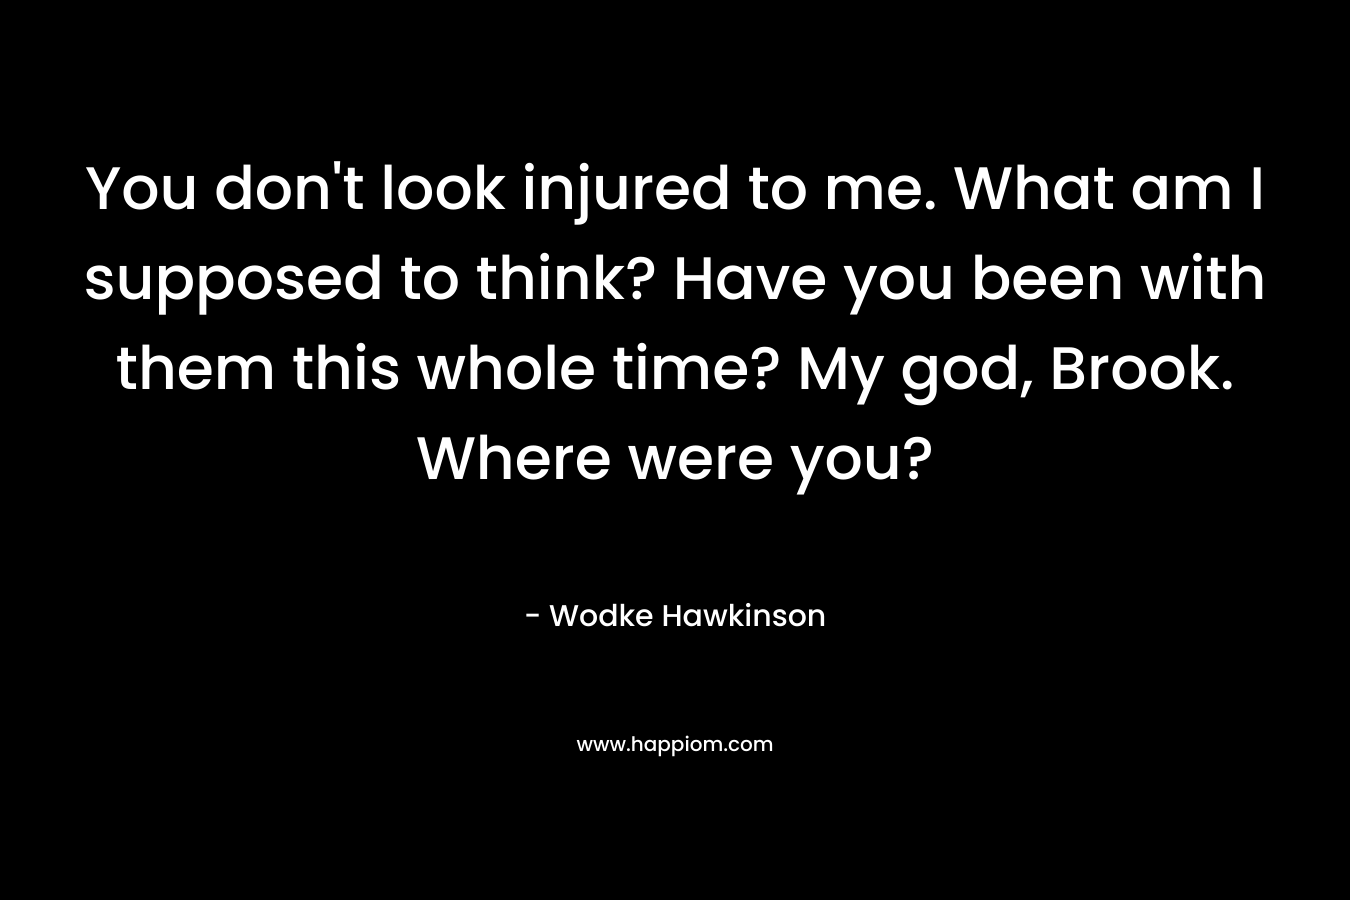 You don’t look injured to me. What am I supposed to think? Have you been with them this whole time? My god, Brook. Where were you? – Wodke Hawkinson